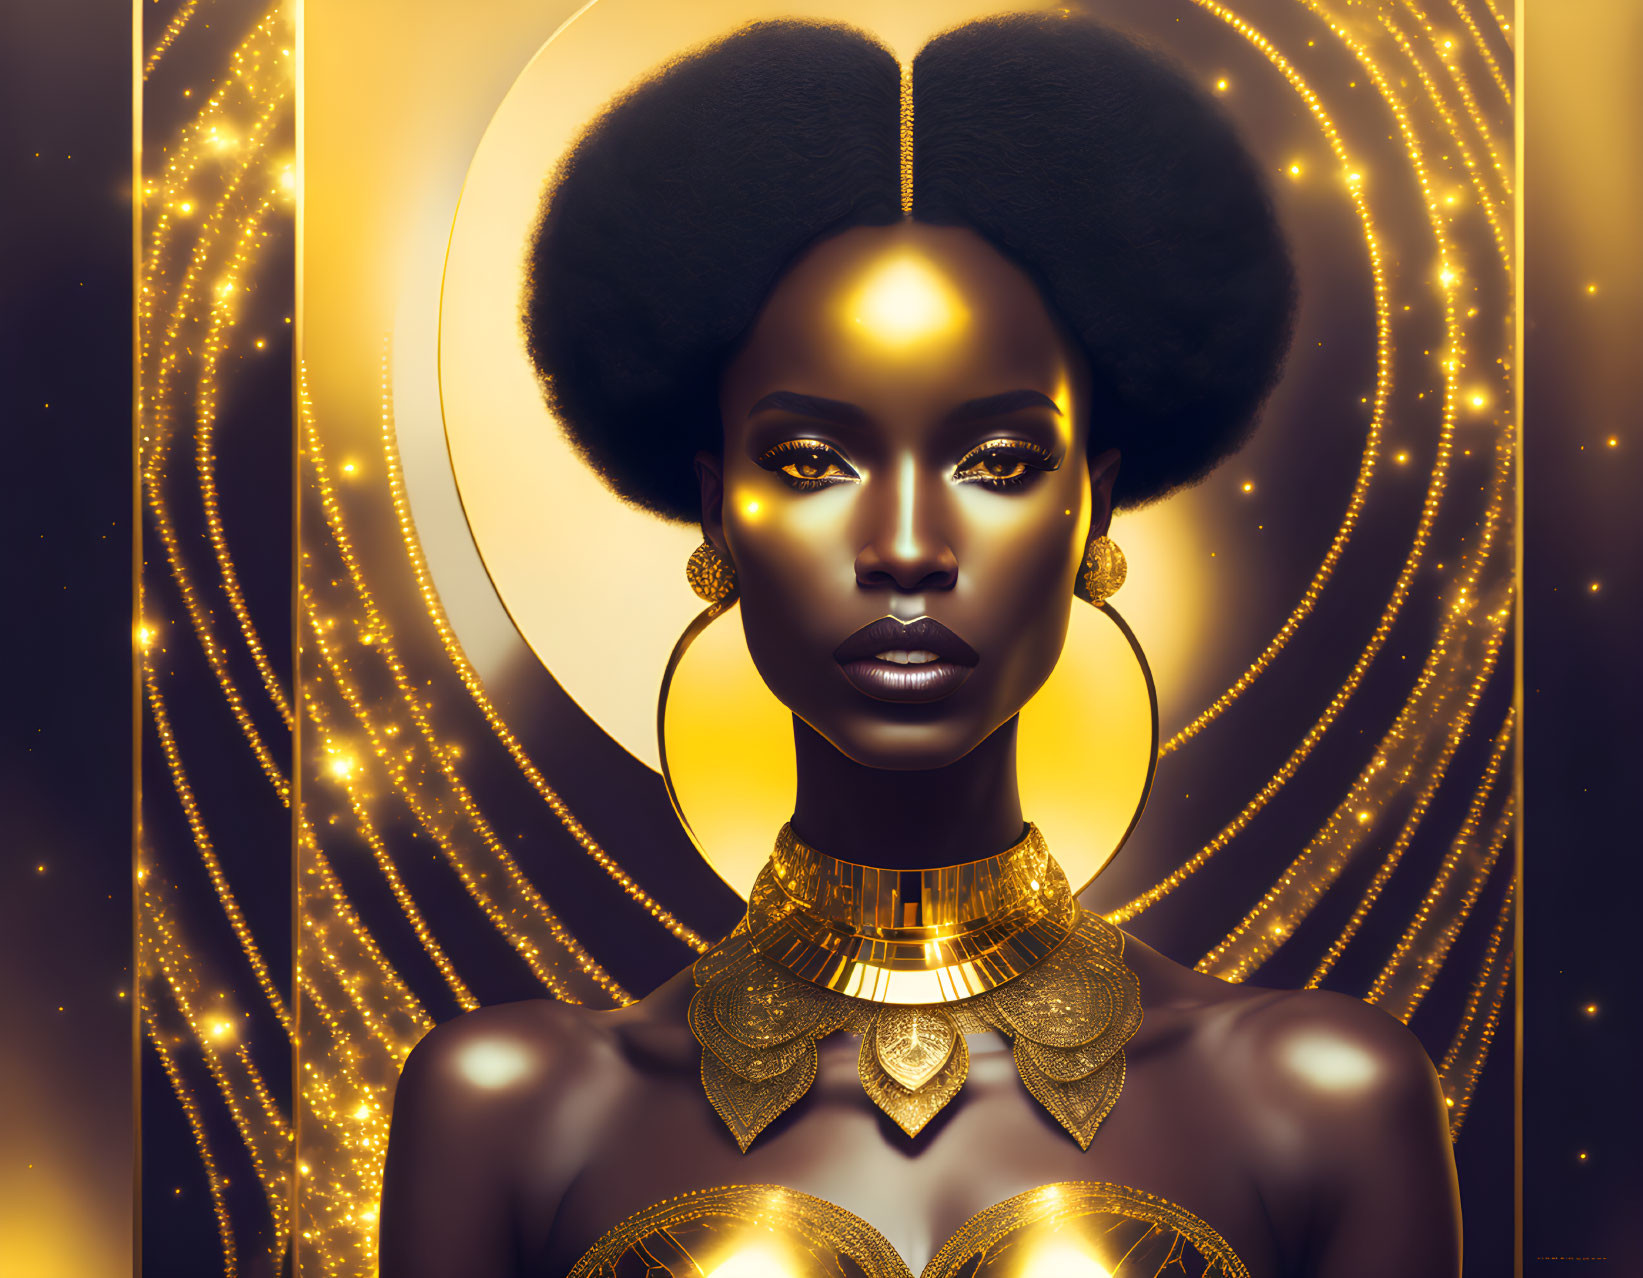 Stylized afro-haired woman with gold jewelry on golden backdrop